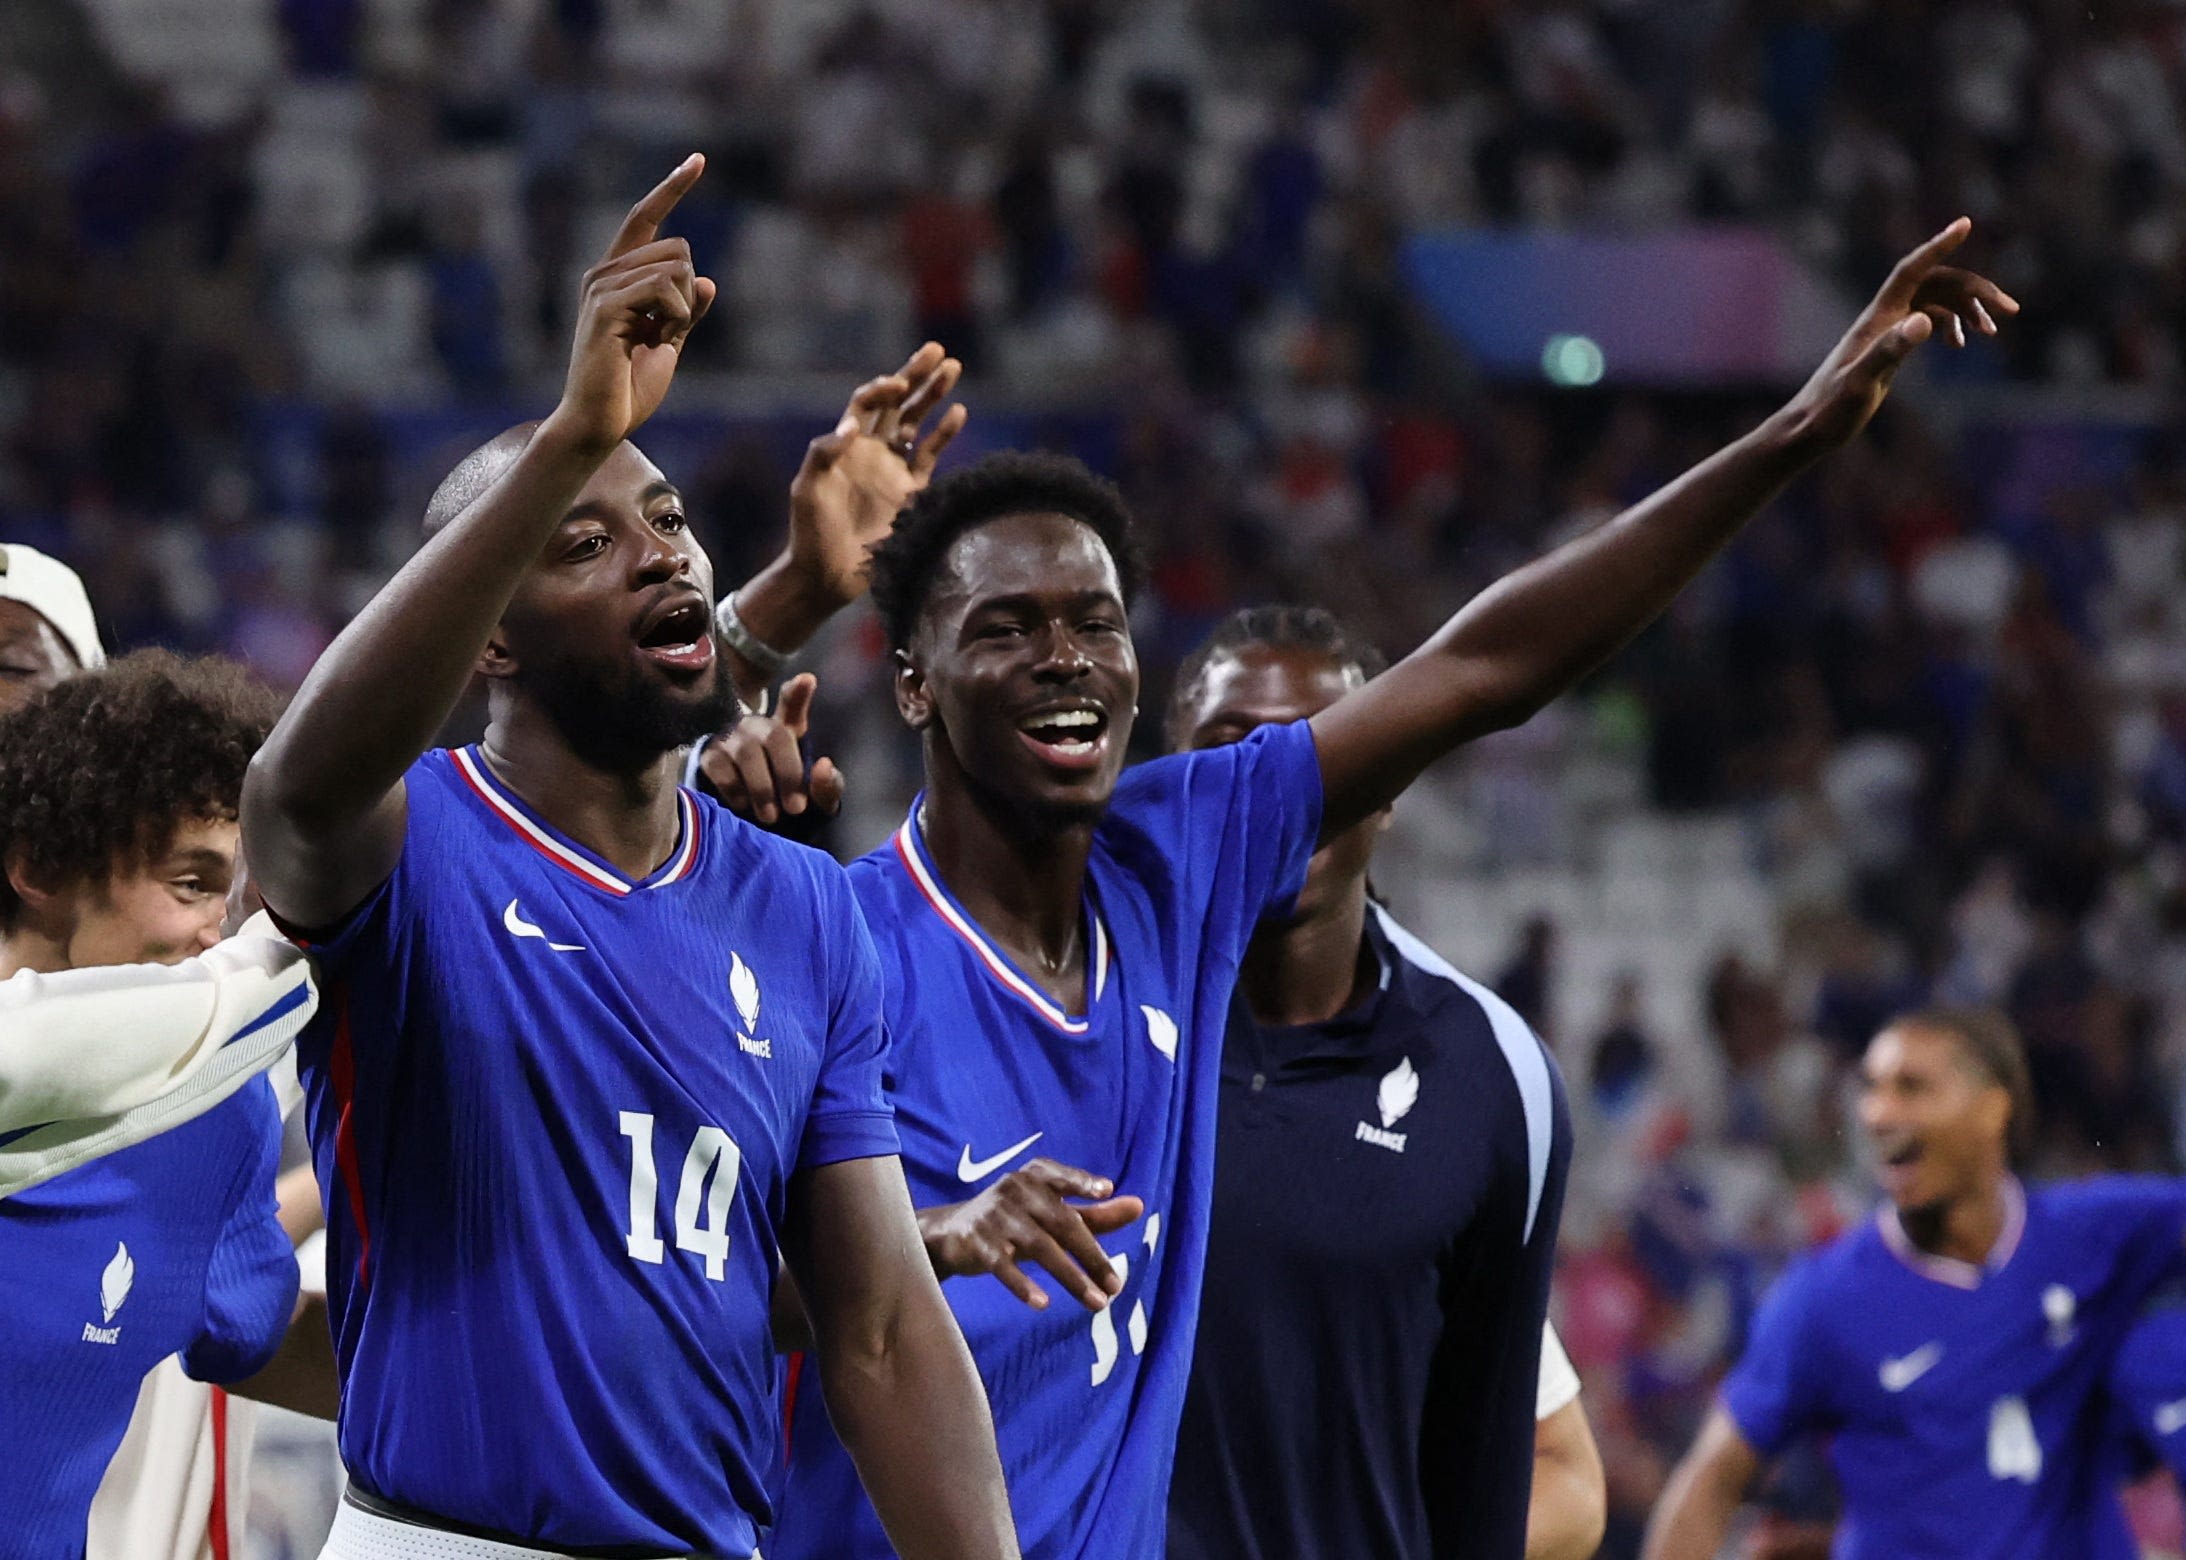 France, Spain to meet in Olympics men's soccer final after thrilling semifinal comebacks